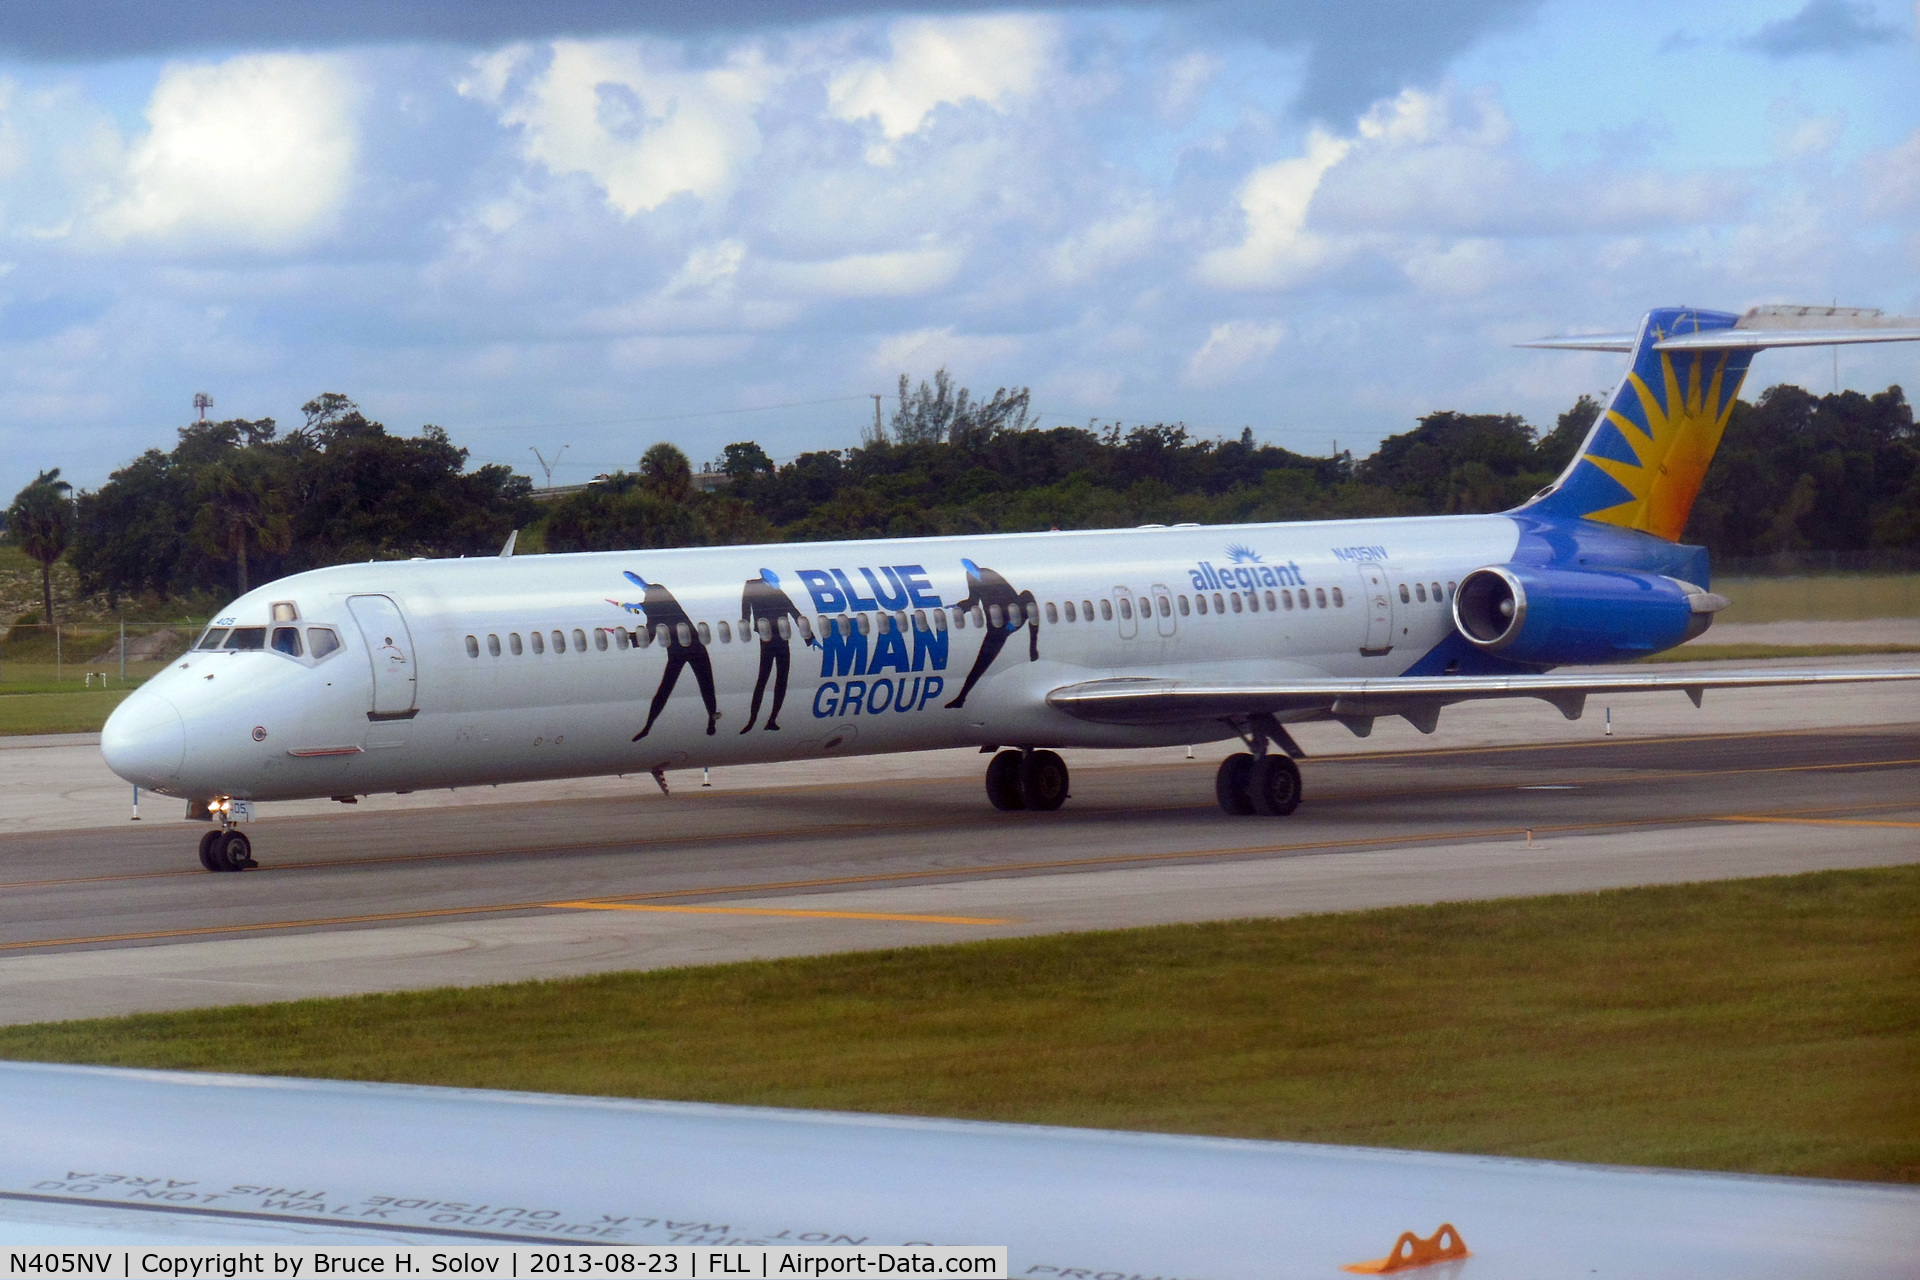 N405NV, 1988 McDonnell Douglas MD-83 (DC-9-83) C/N 49623, on taxiway at FLL